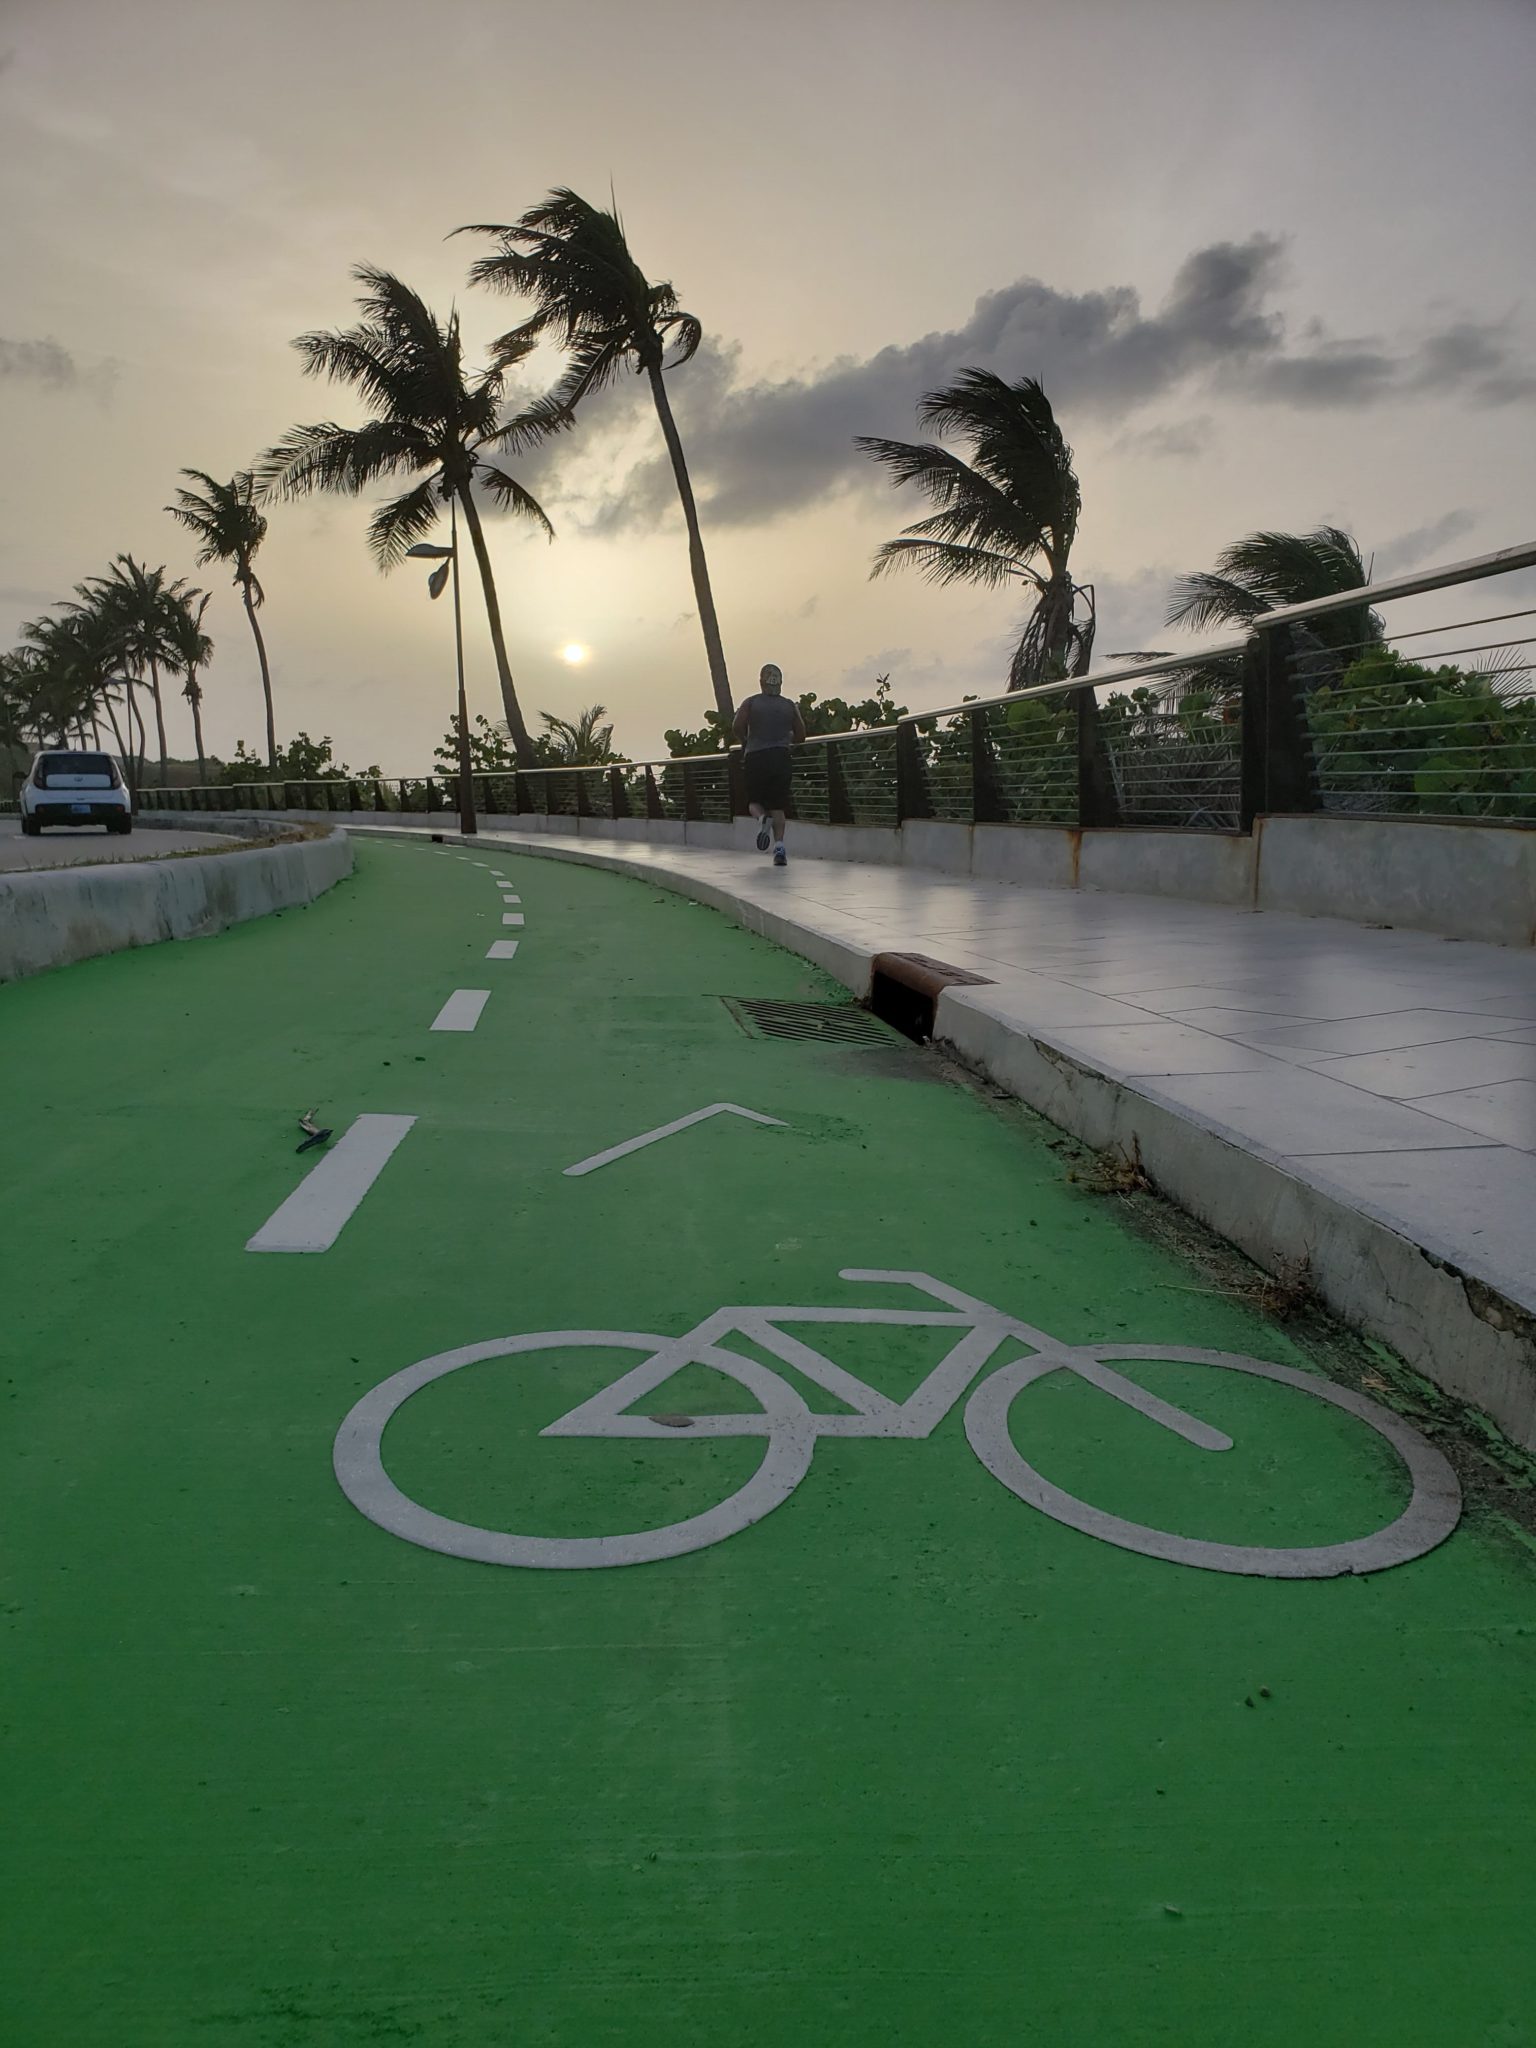 a bicycle lane with palm trees and a person walking on a sidewalk